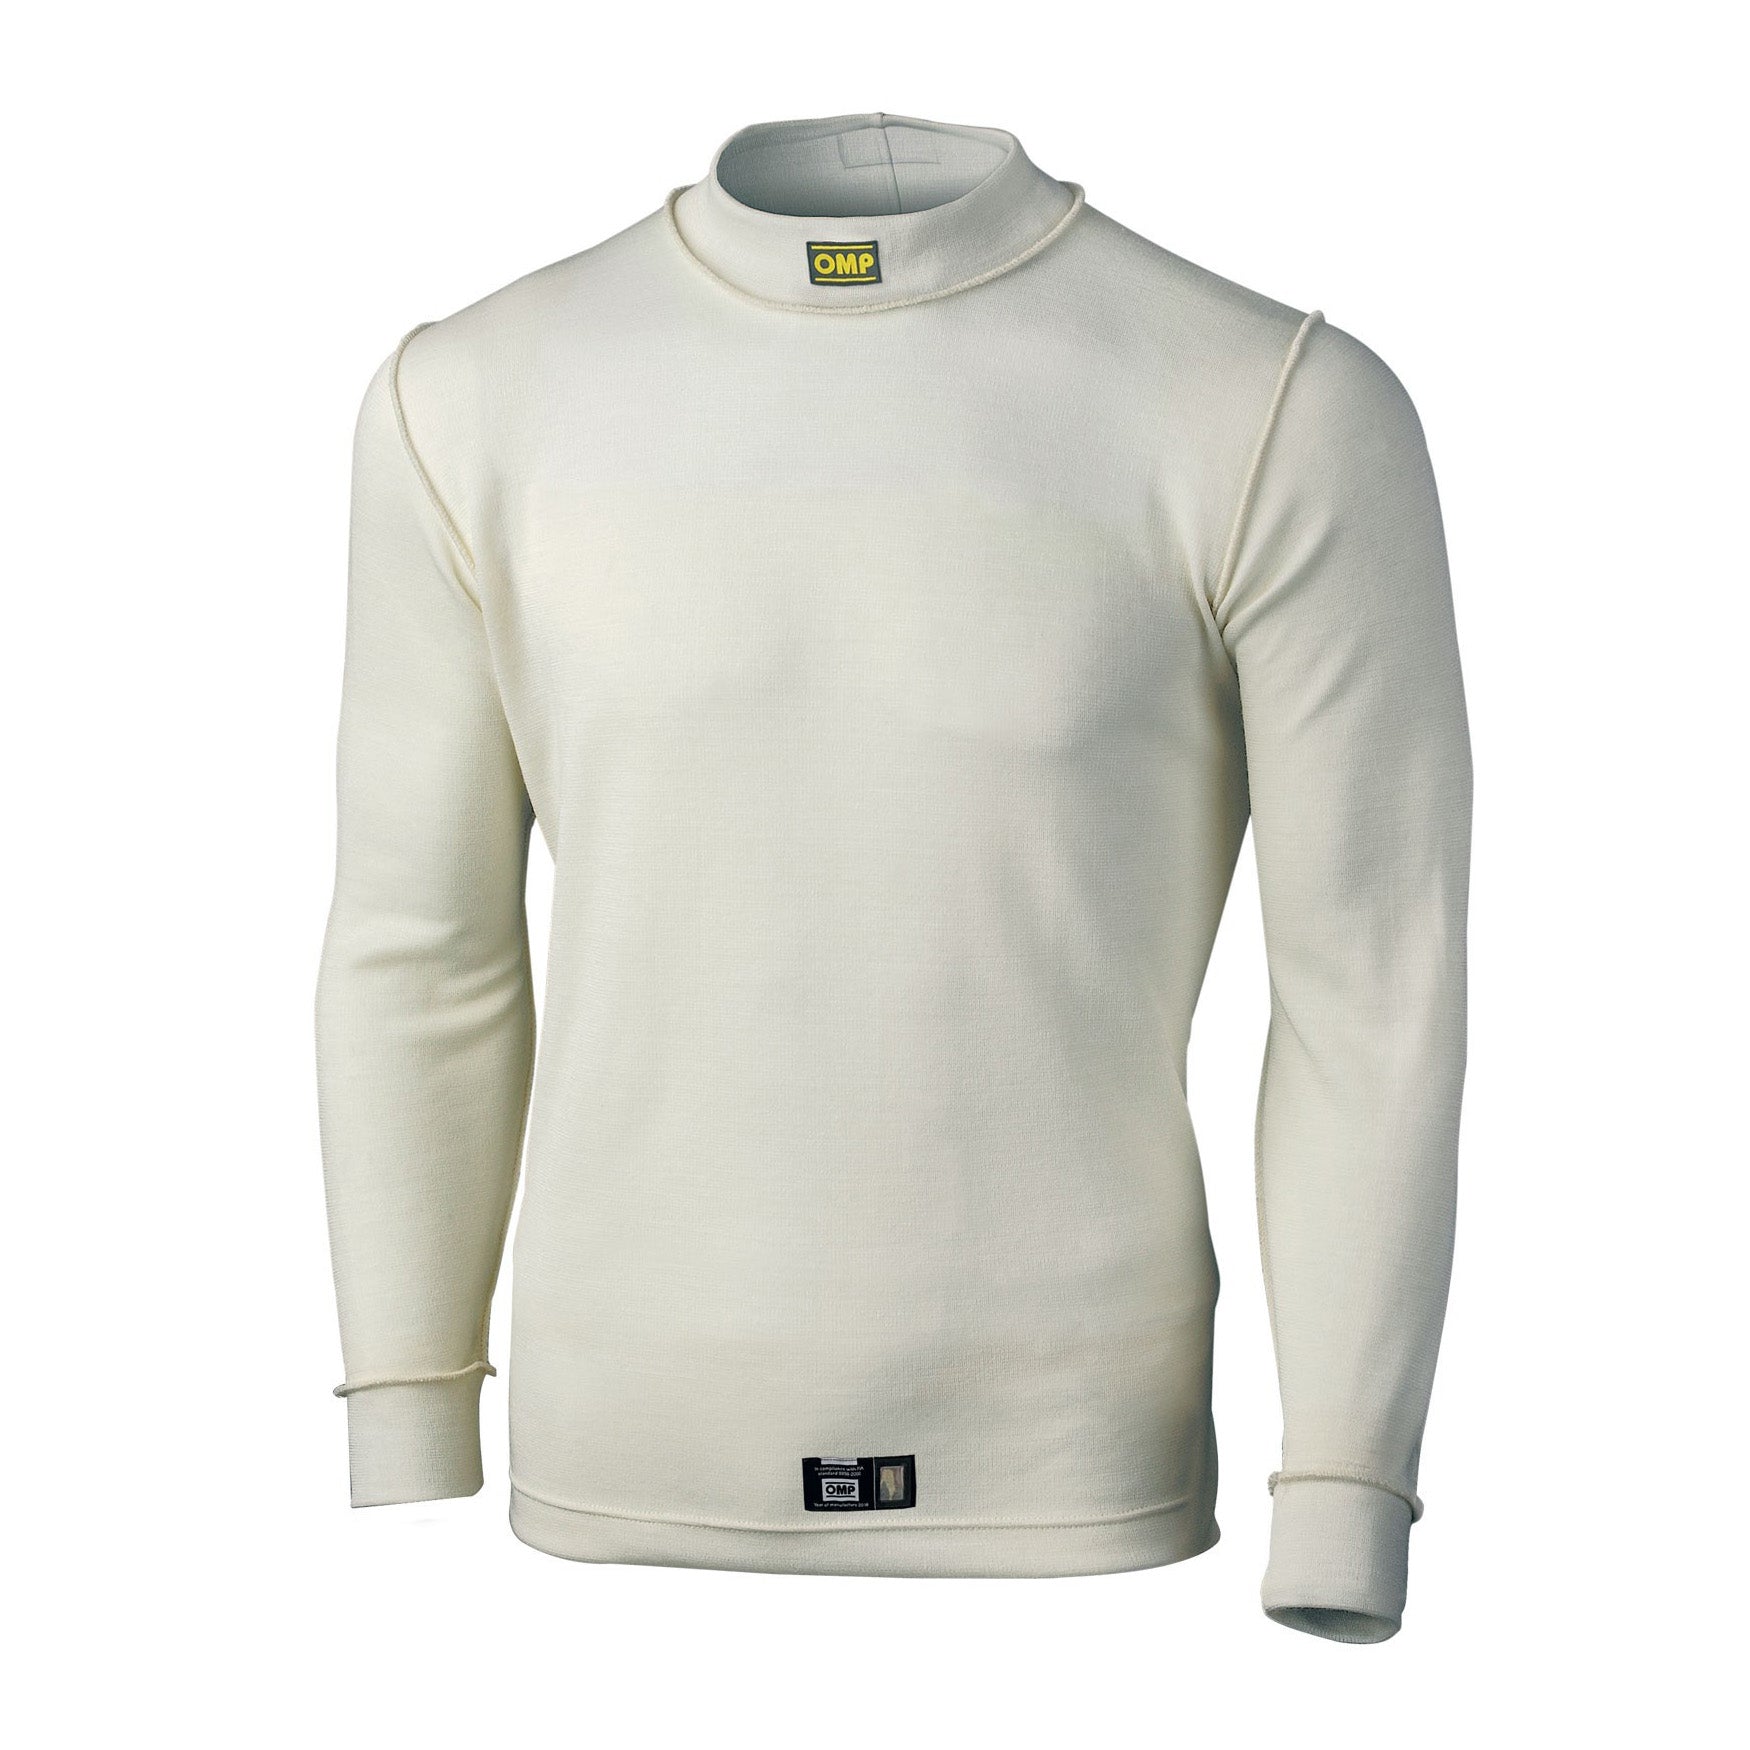 OMP First Top Nomex Undershirt